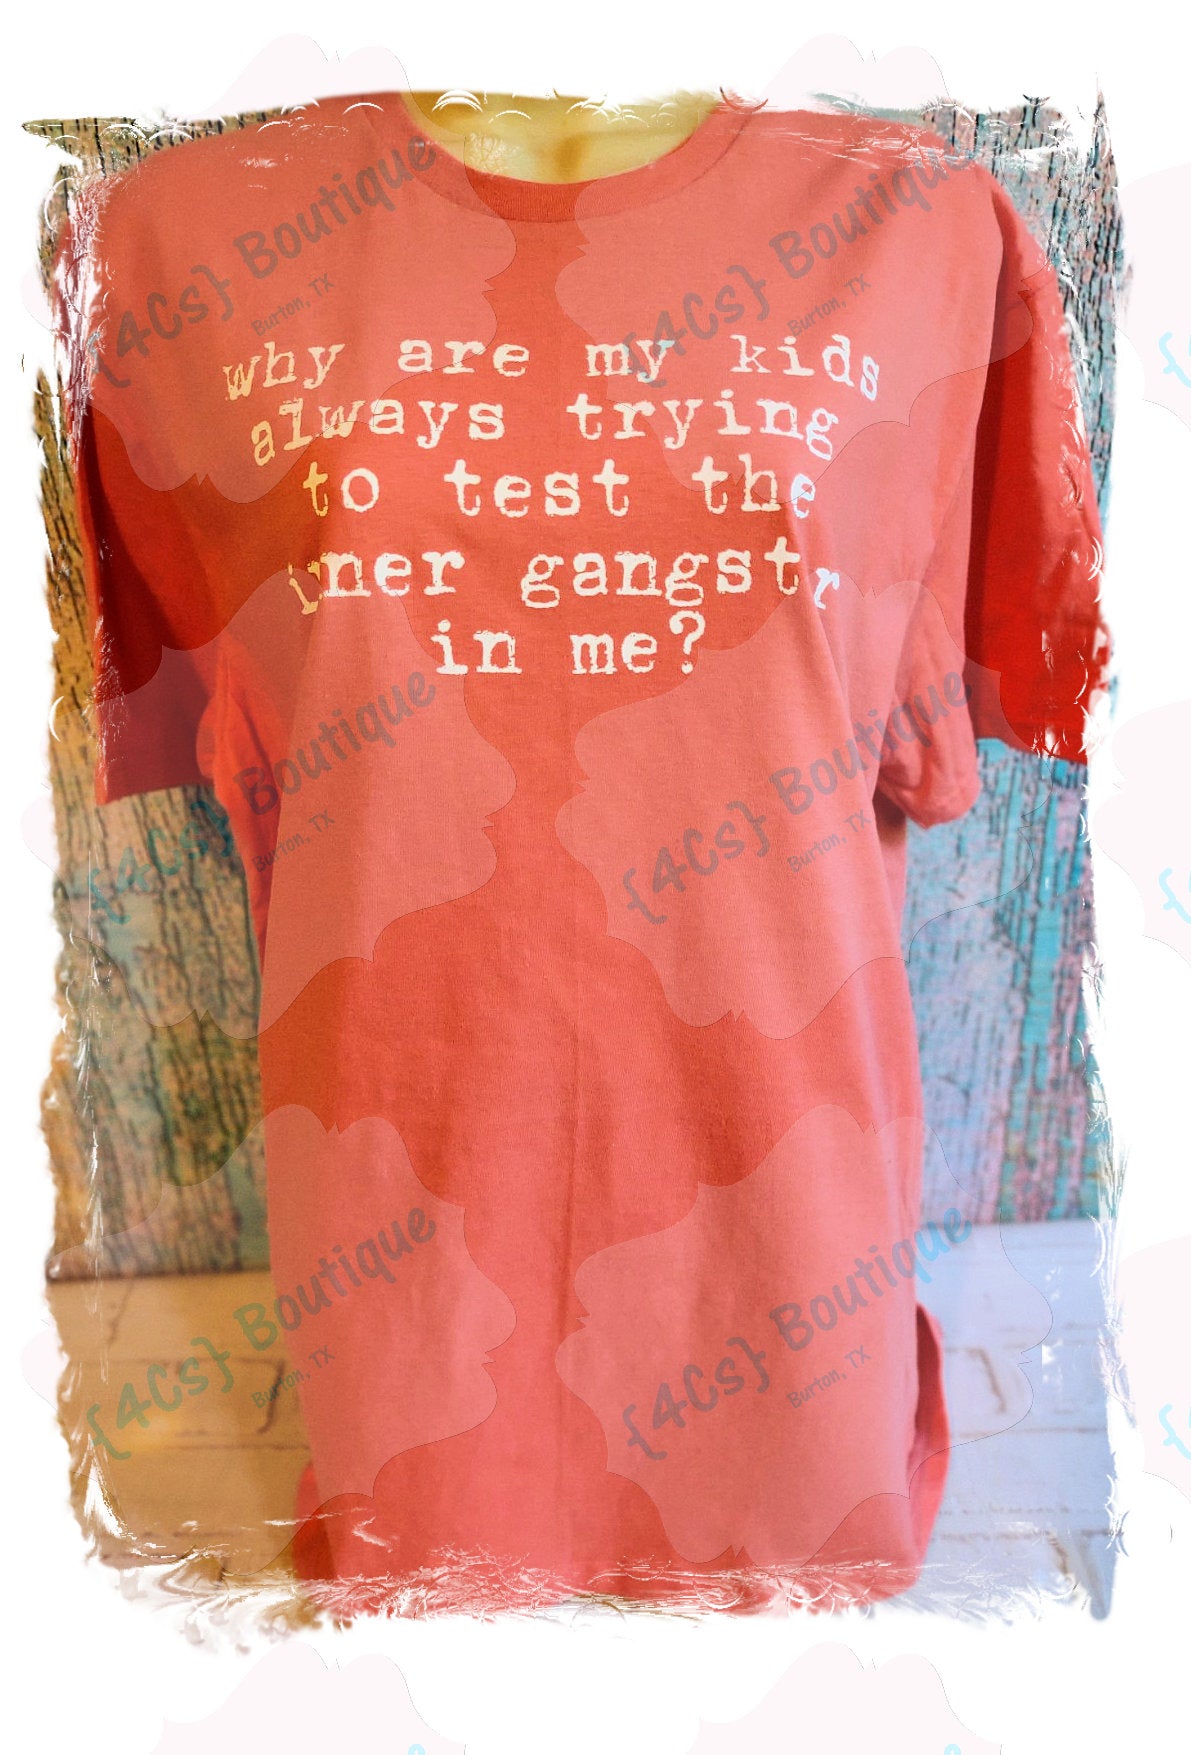 Why Are My Kids Always Trying To Test The Gangster In Me? Shirt